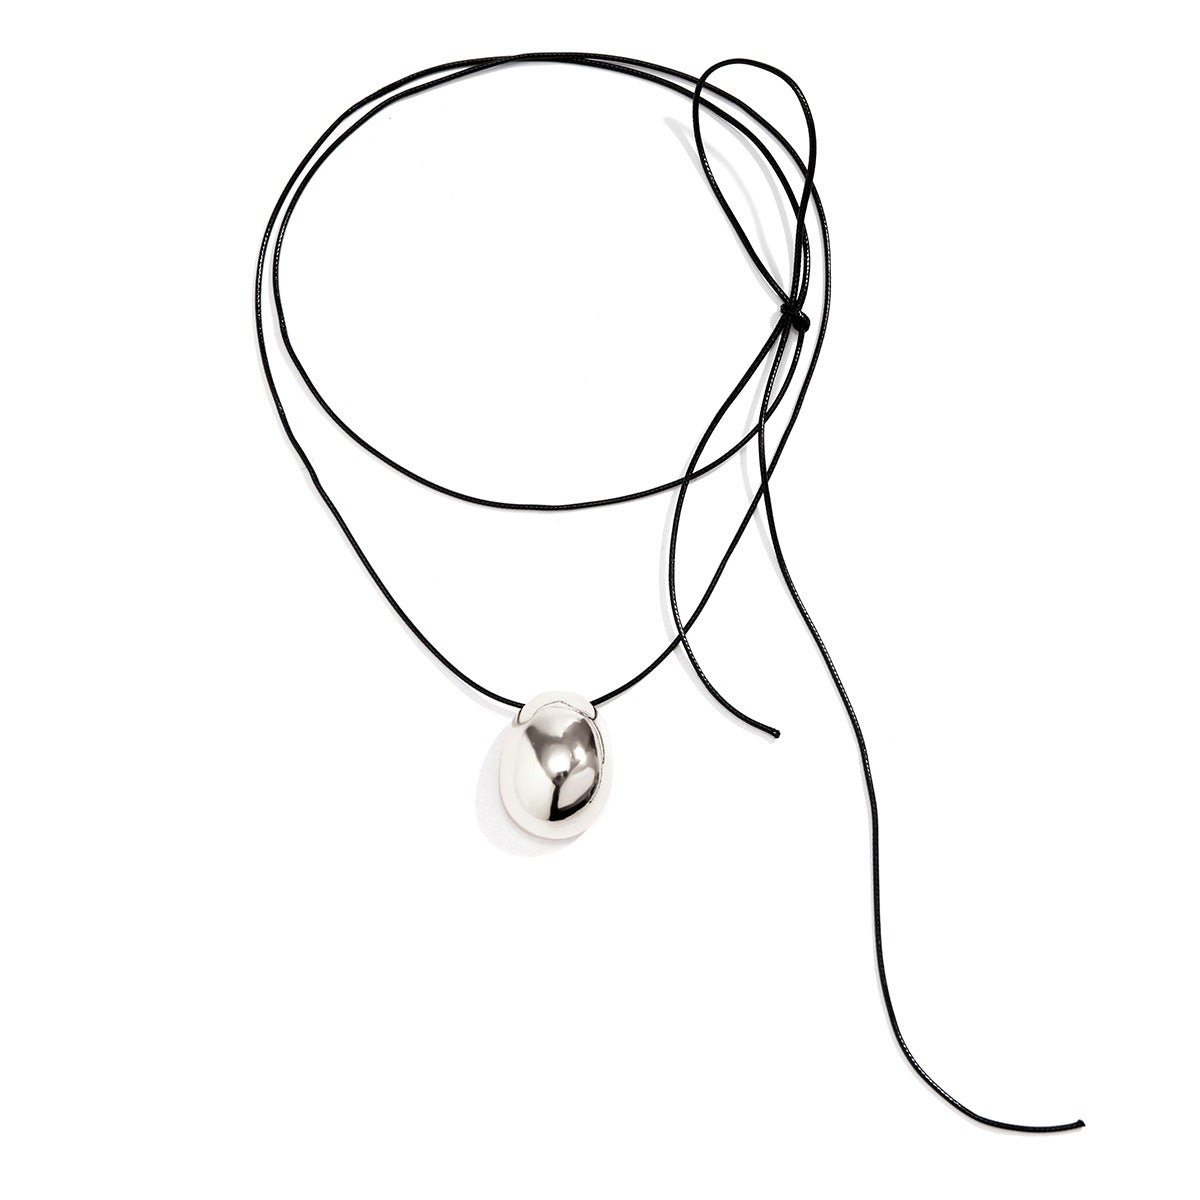 Multi-layered Oval Pendant Choker Necklace in Glossy Finish